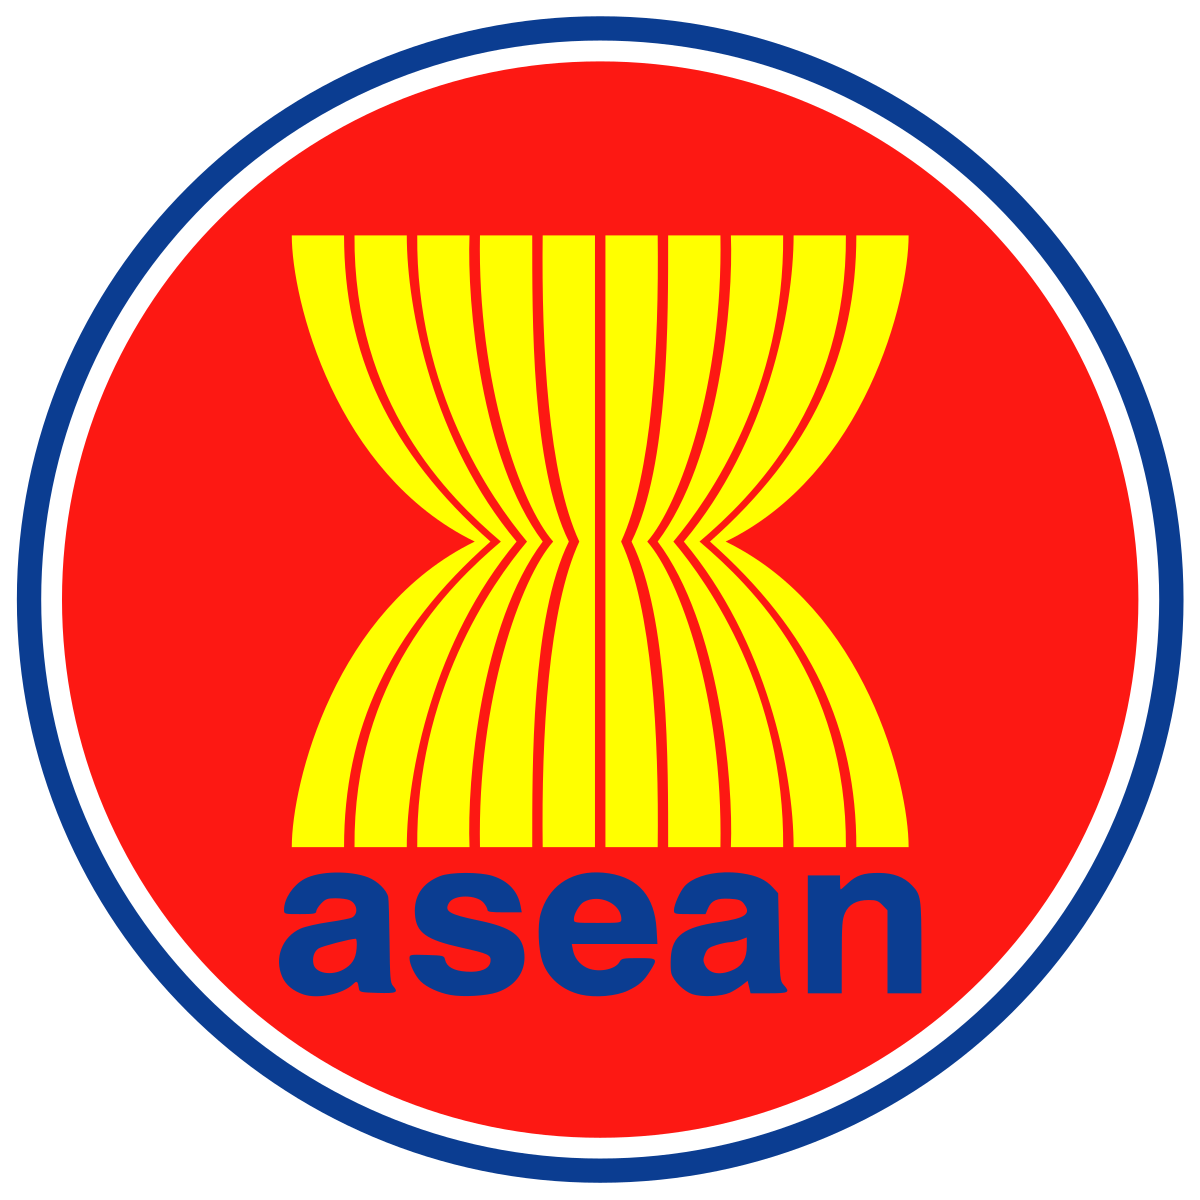 Association of Southeast Asian Nations (ASEAN)